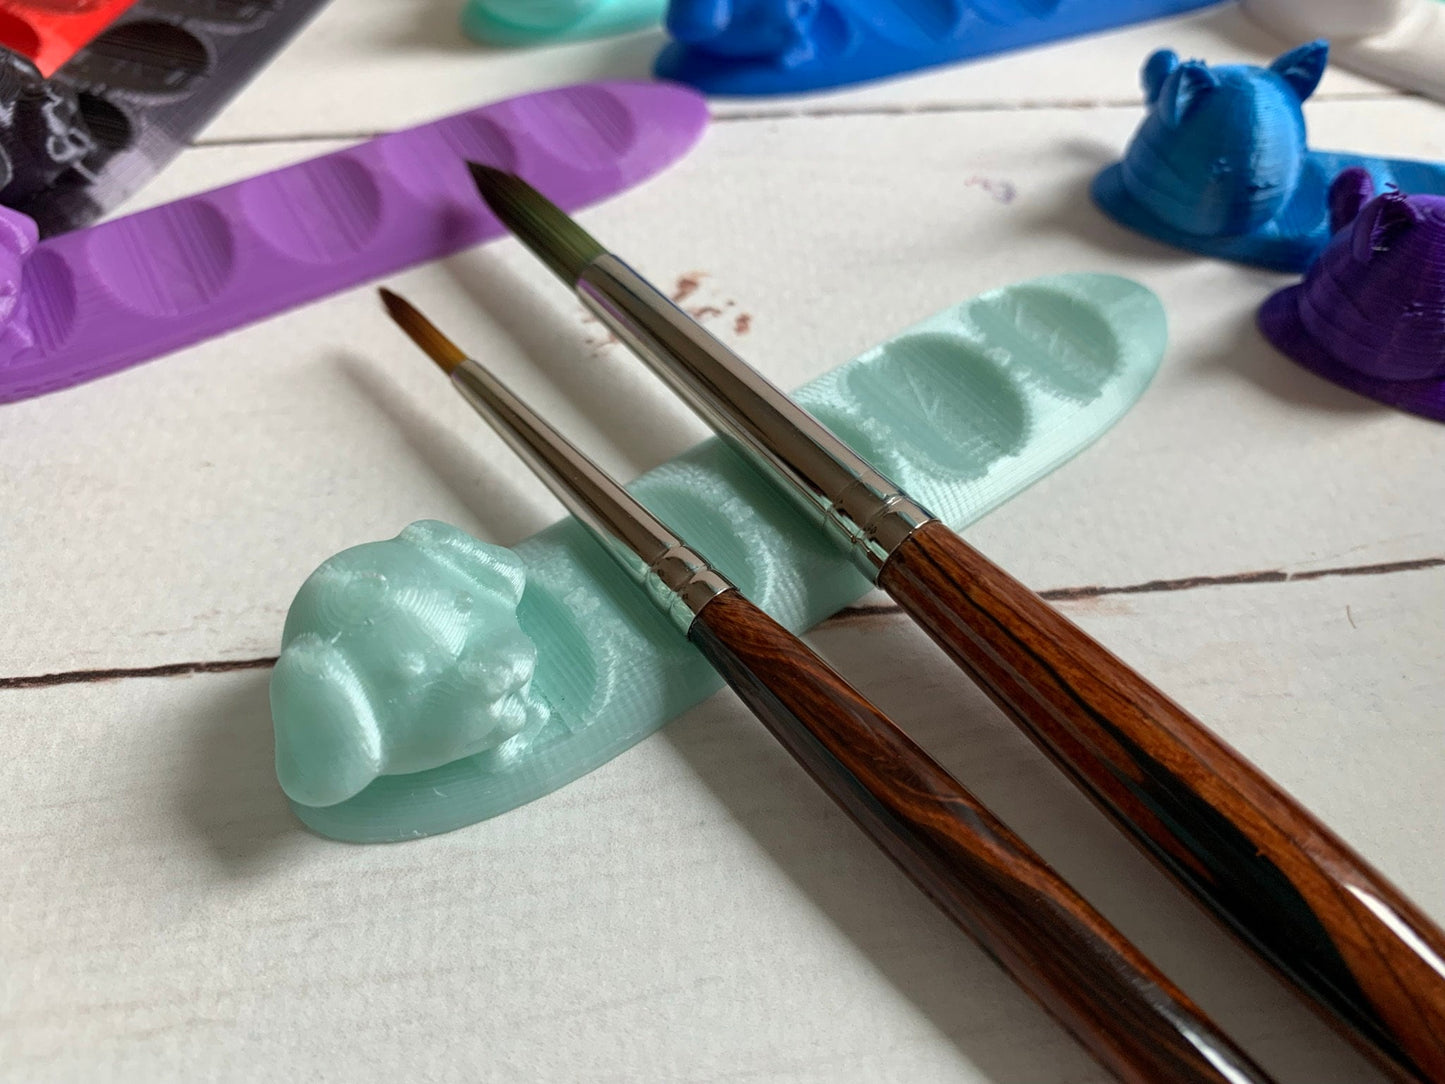 Cute Kitty Cat or Puppy Dog Paint Brush Rest -  PLA Bioplastic 3D Printed - for Watercolor / Acrylic / Oil Painting